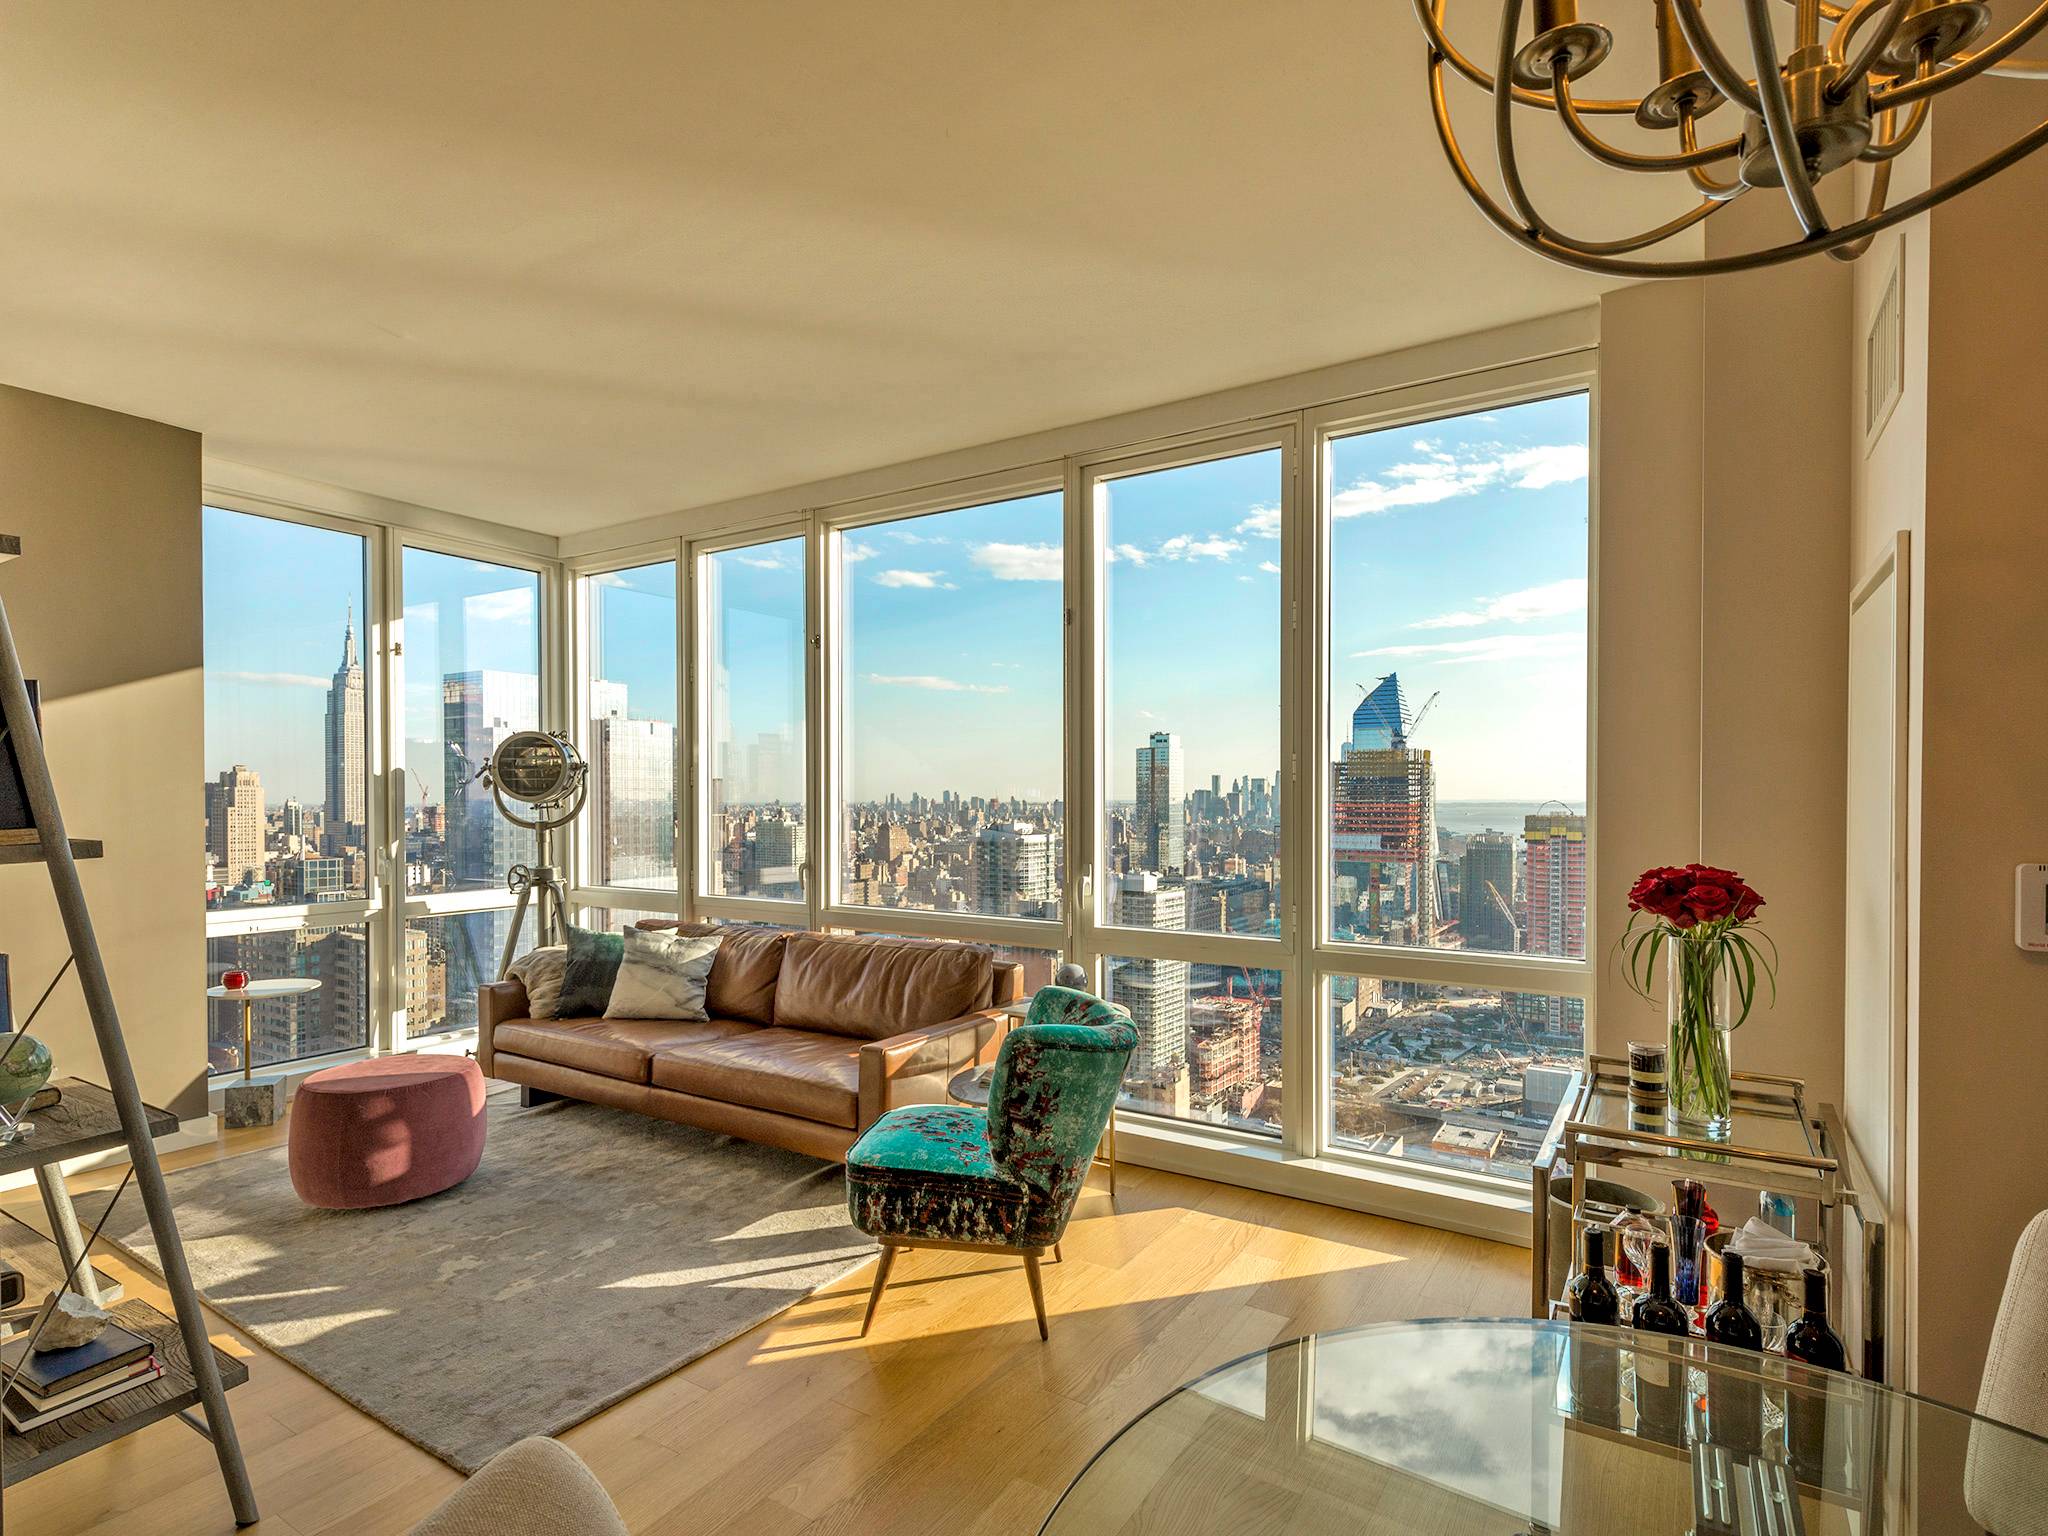 NO FEE High Floor Corner 2 Bed 2 Bath at SKY BUILDING in Midtown West! Gorgeous Views and Over-the-top Amenities!